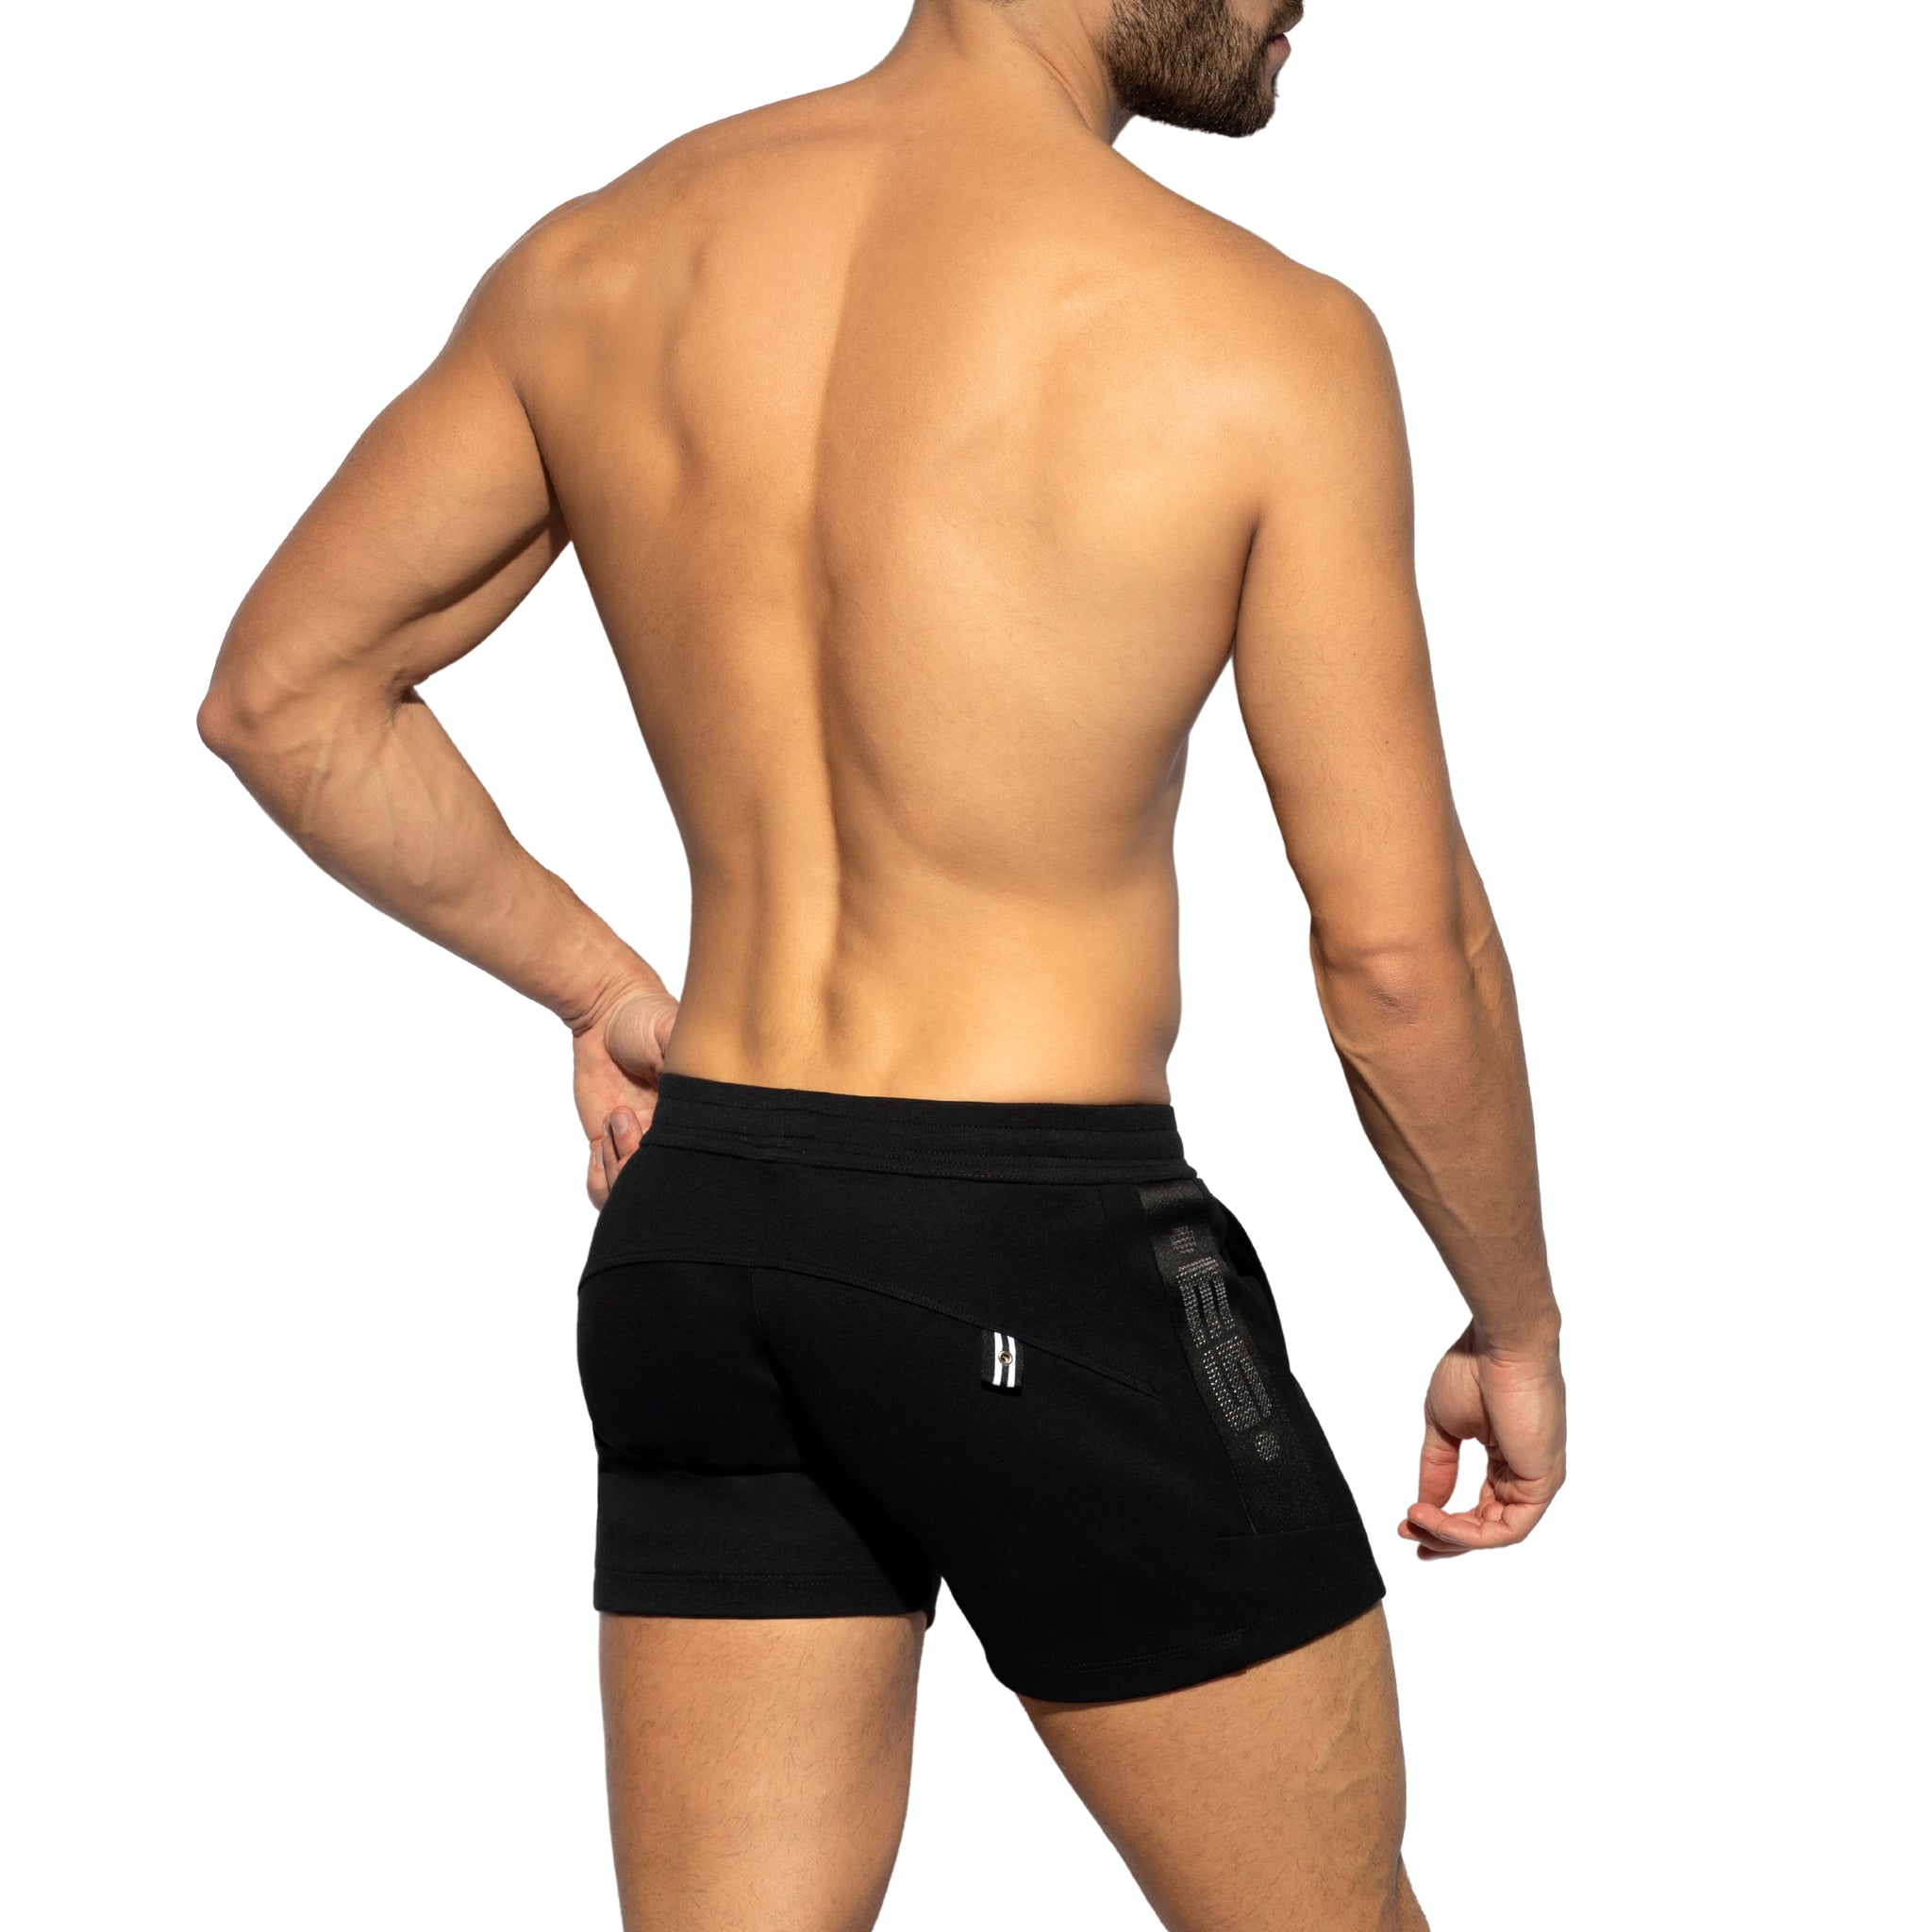 ES Collection First Class Athletic Shorts Black SP298